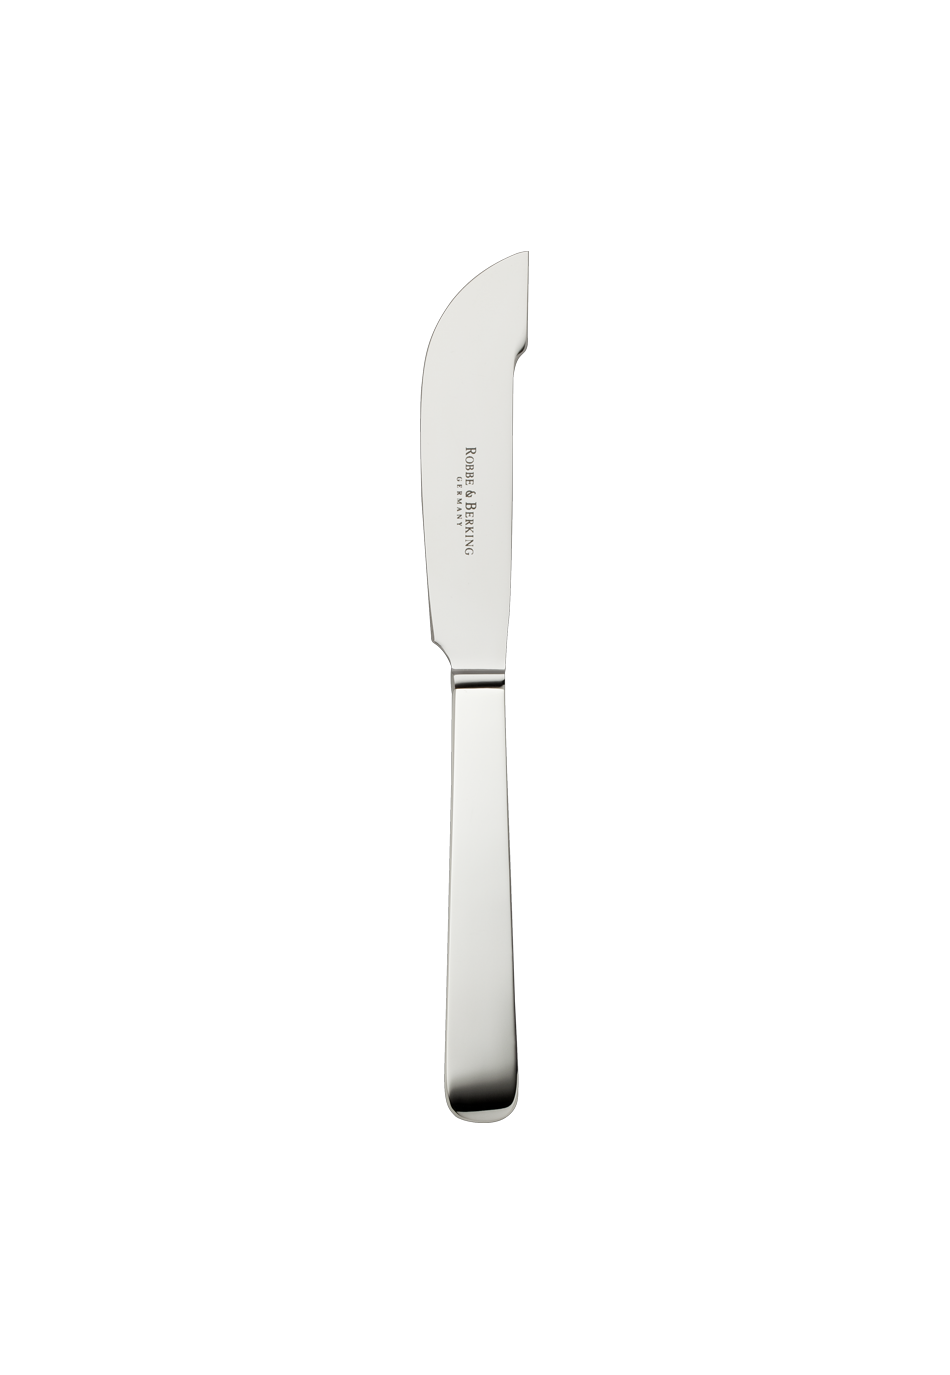 Alta Cheese Knife (150g massive silverplated)